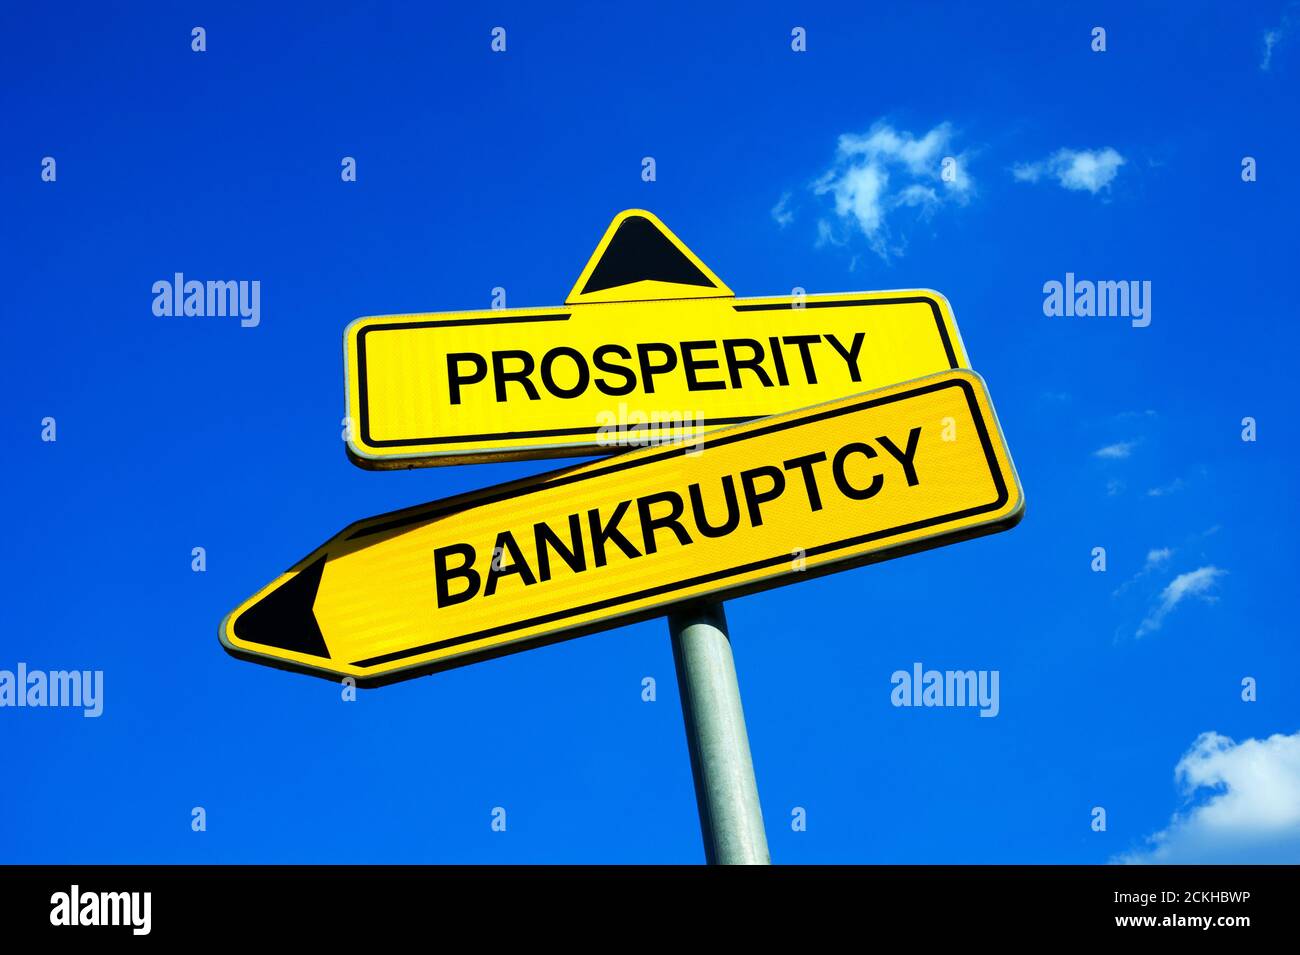 Prosperity or Bankruptcy - Traffic sign with two options - question of reform and austerity to gain profit and prevent failure of economy, inflation, Stock Photo